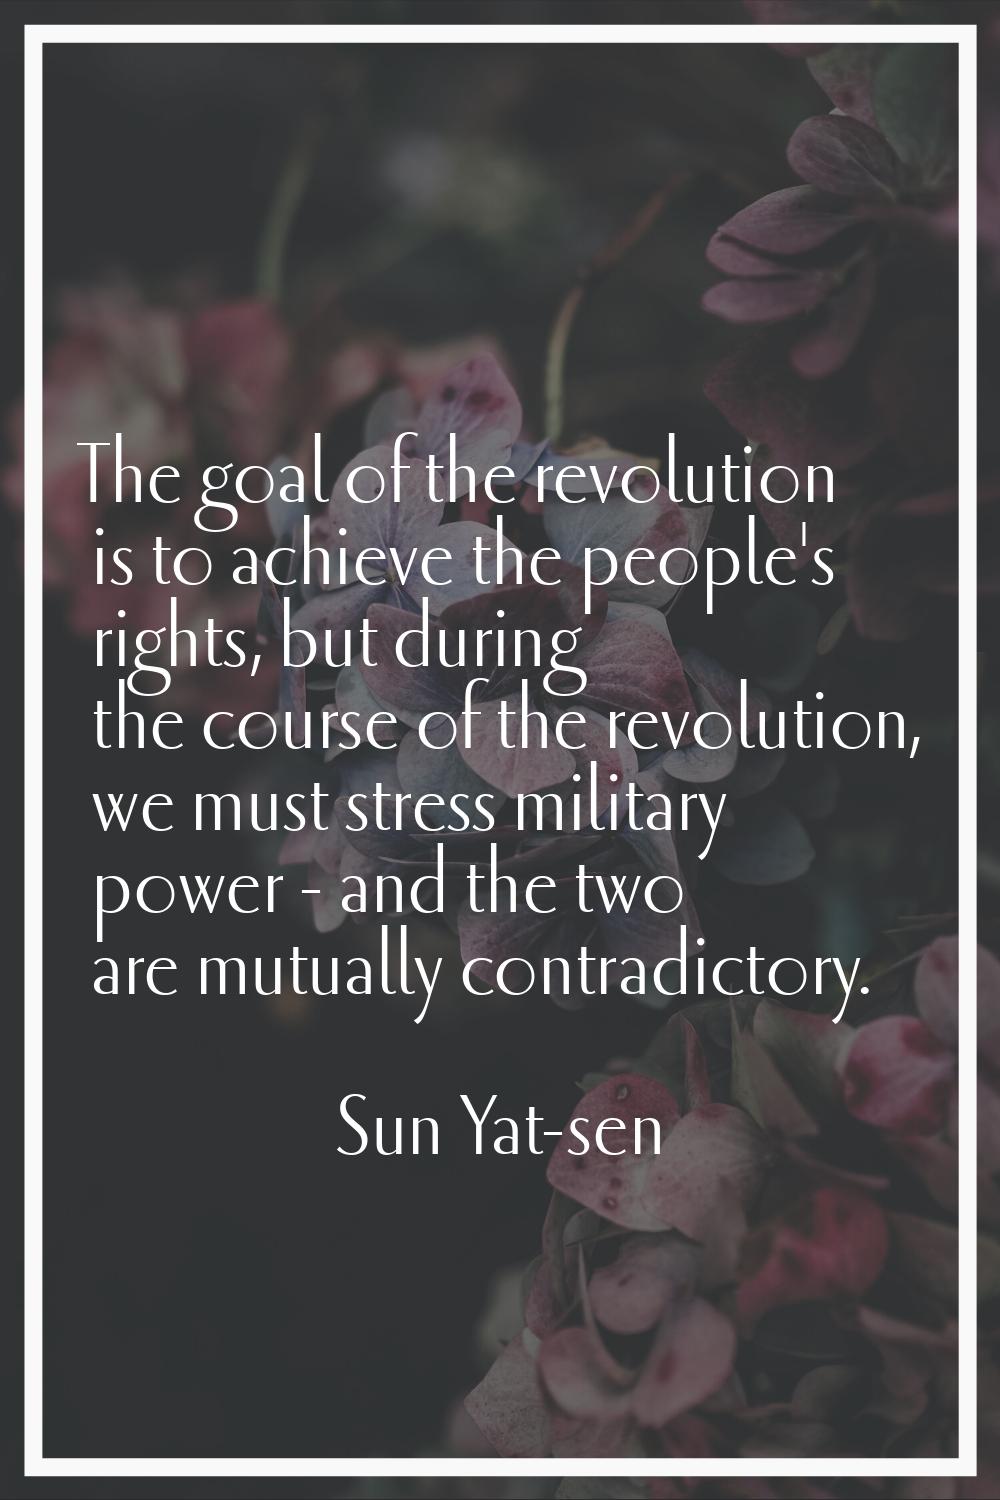 The goal of the revolution is to achieve the people's rights, but during the course of the revoluti